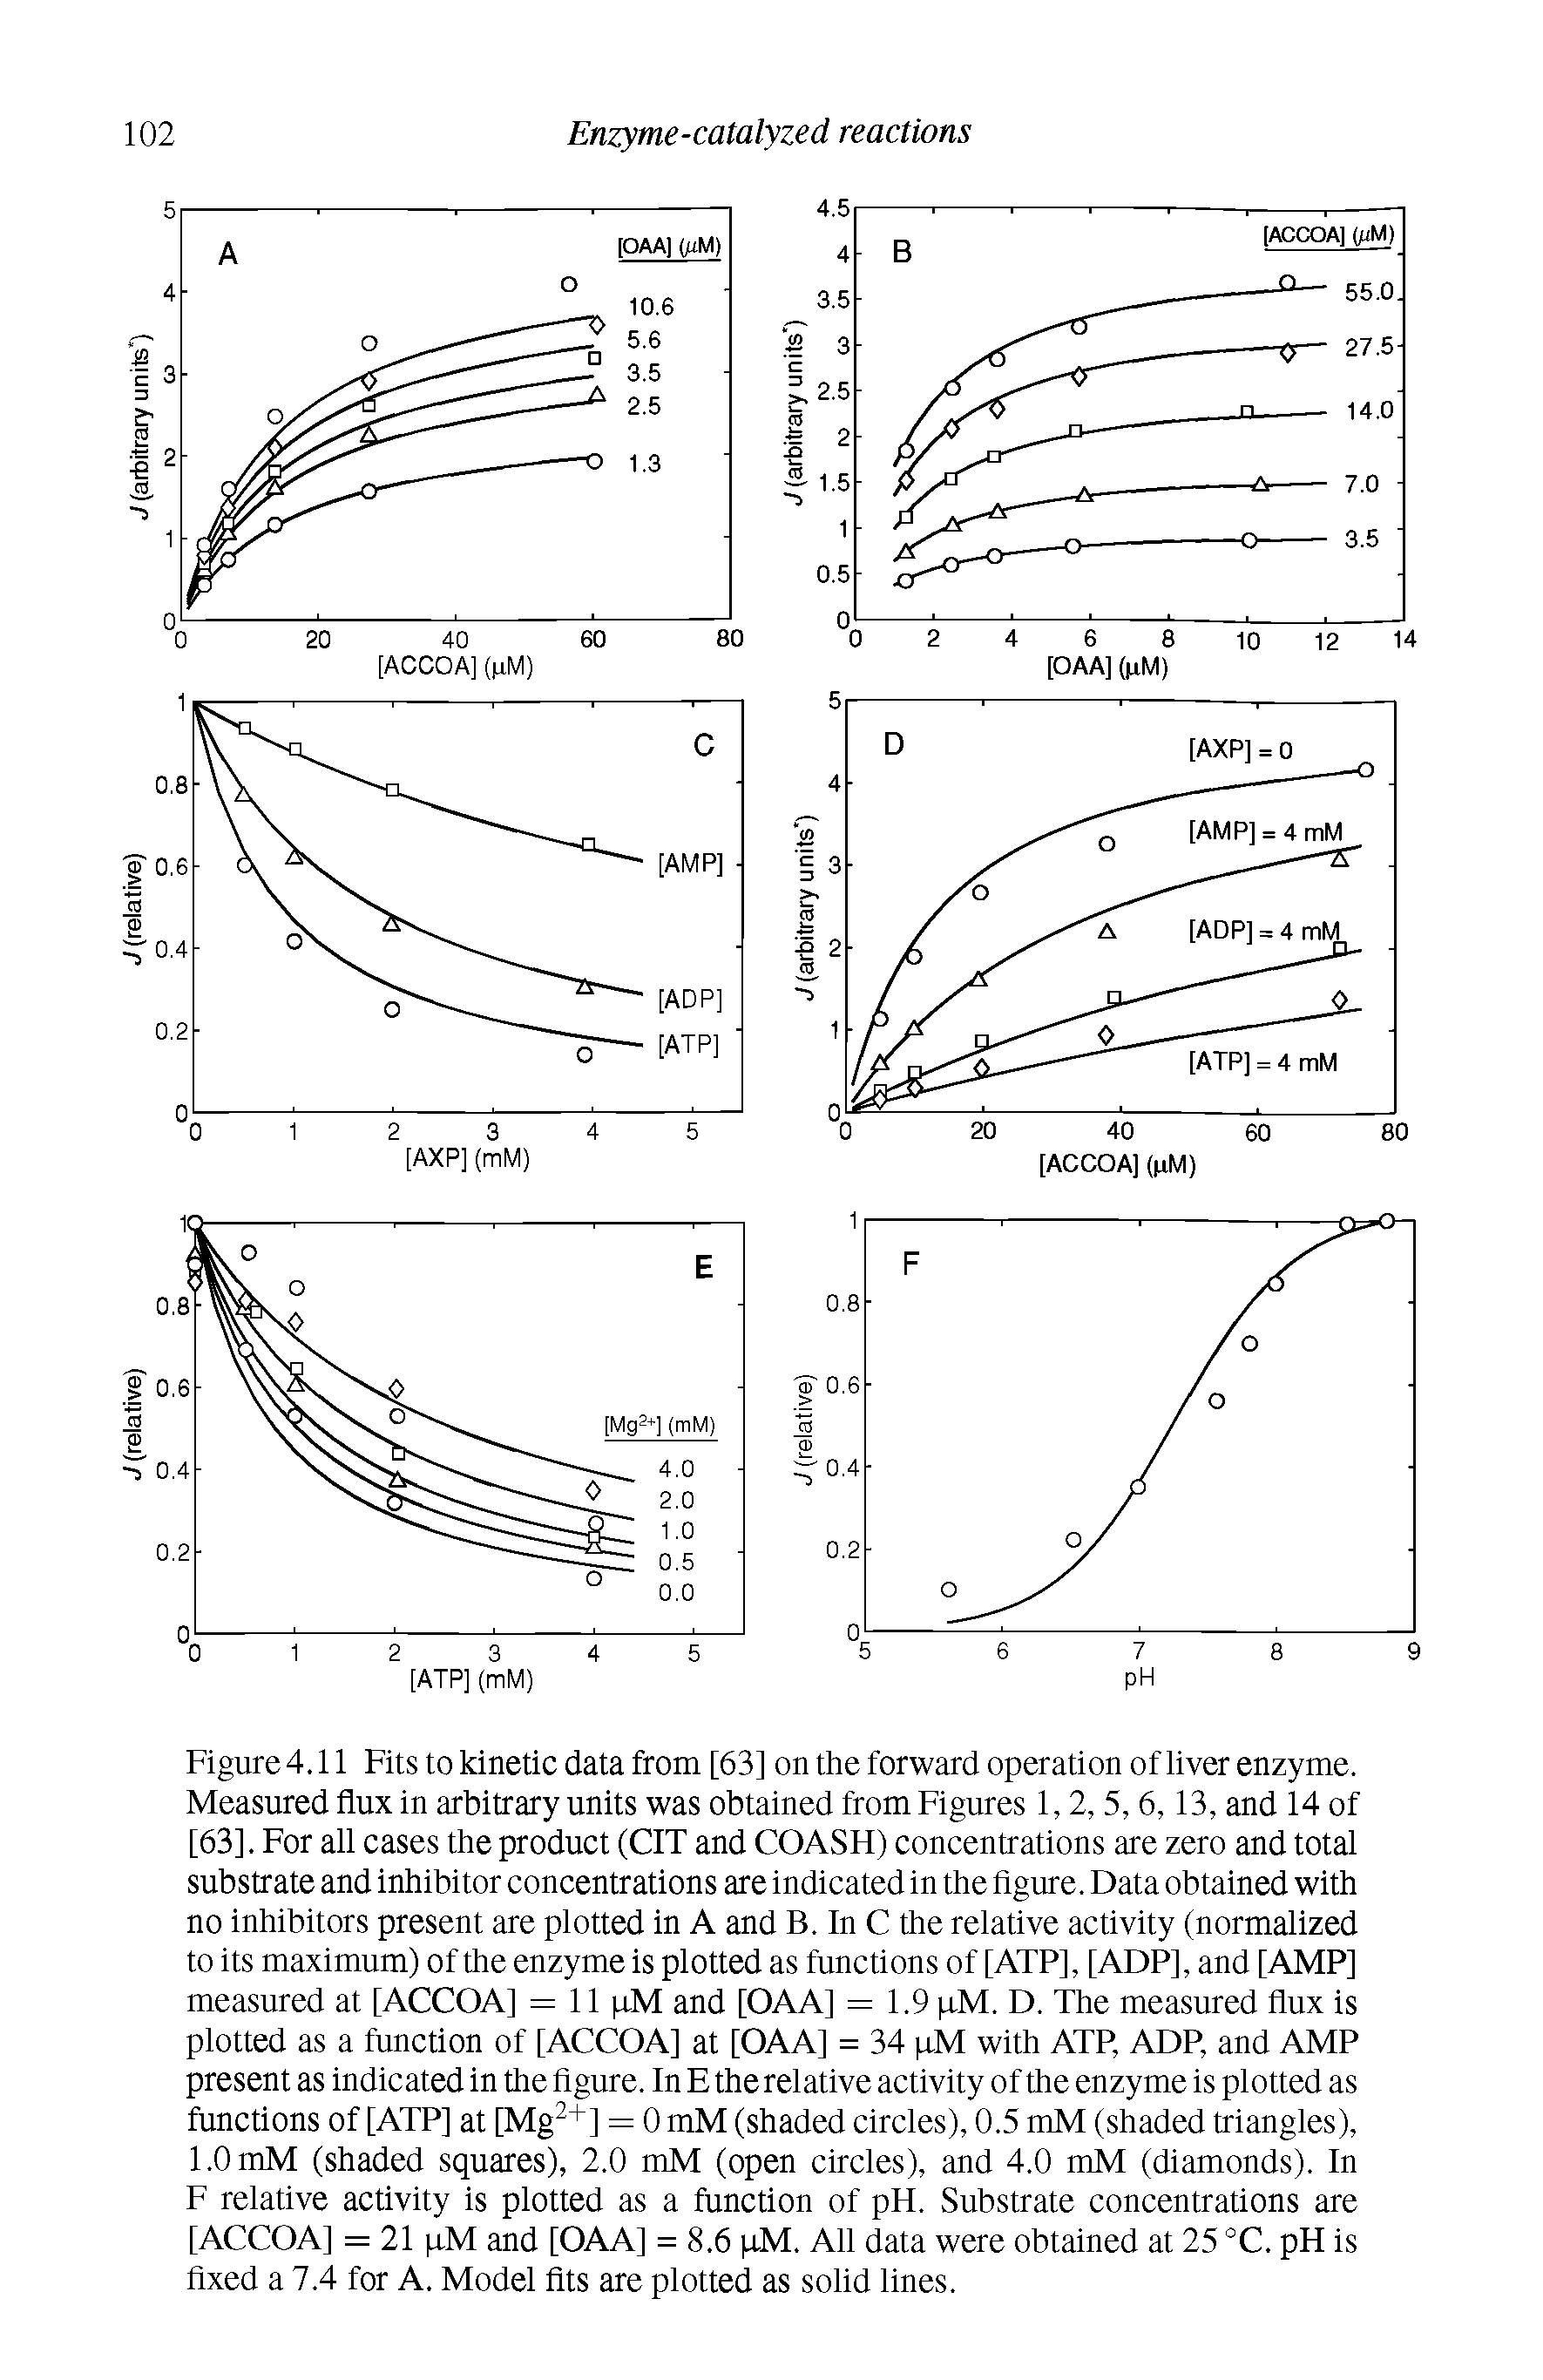 Figure4.11 Fits to kinetic data from [63] on the forward operation of liver enzyme. Measured flux in arbitrary units was obtained from Figures 1,2, 5, 6,13, and 14 of [63], For all cases the product (CIT and COASH) concentrations are zero and total substrate and inhibitor concentrations are indicated in the figure. Data obtained with no inhibitors present are plotted in A and B. In C the relative activity (normalized to its maximum) of the enzyme is plotted as functions of [ATP], [ADP], and [AMP] measured at [ACCOA] = 11 TM and [OAA] = 1.9 uM. D. The measured flux is plotted as a function of [ACCOA] at [OAA] = 34 qM with ATP, ADP, and AMP present as indicated in the figure. In E the relative activity of the enzyme is plotted as functions of [ATP] at [Mg2+] = 0 mM (shaded circles), 0.5 mM (shaded triangles), 1.0 mM (shaded squares), 2.0 mM (open circles), and 4.0 mM (diamonds). In F relative activity is plotted as a function of pH. Substrate concentrations are [ACCOA] = 21 qM and [OAA] = 8.6 qM. All data were obtained at 25 °C. pH is fixed a 7.4 for A. Model fits are plotted as solid lines.